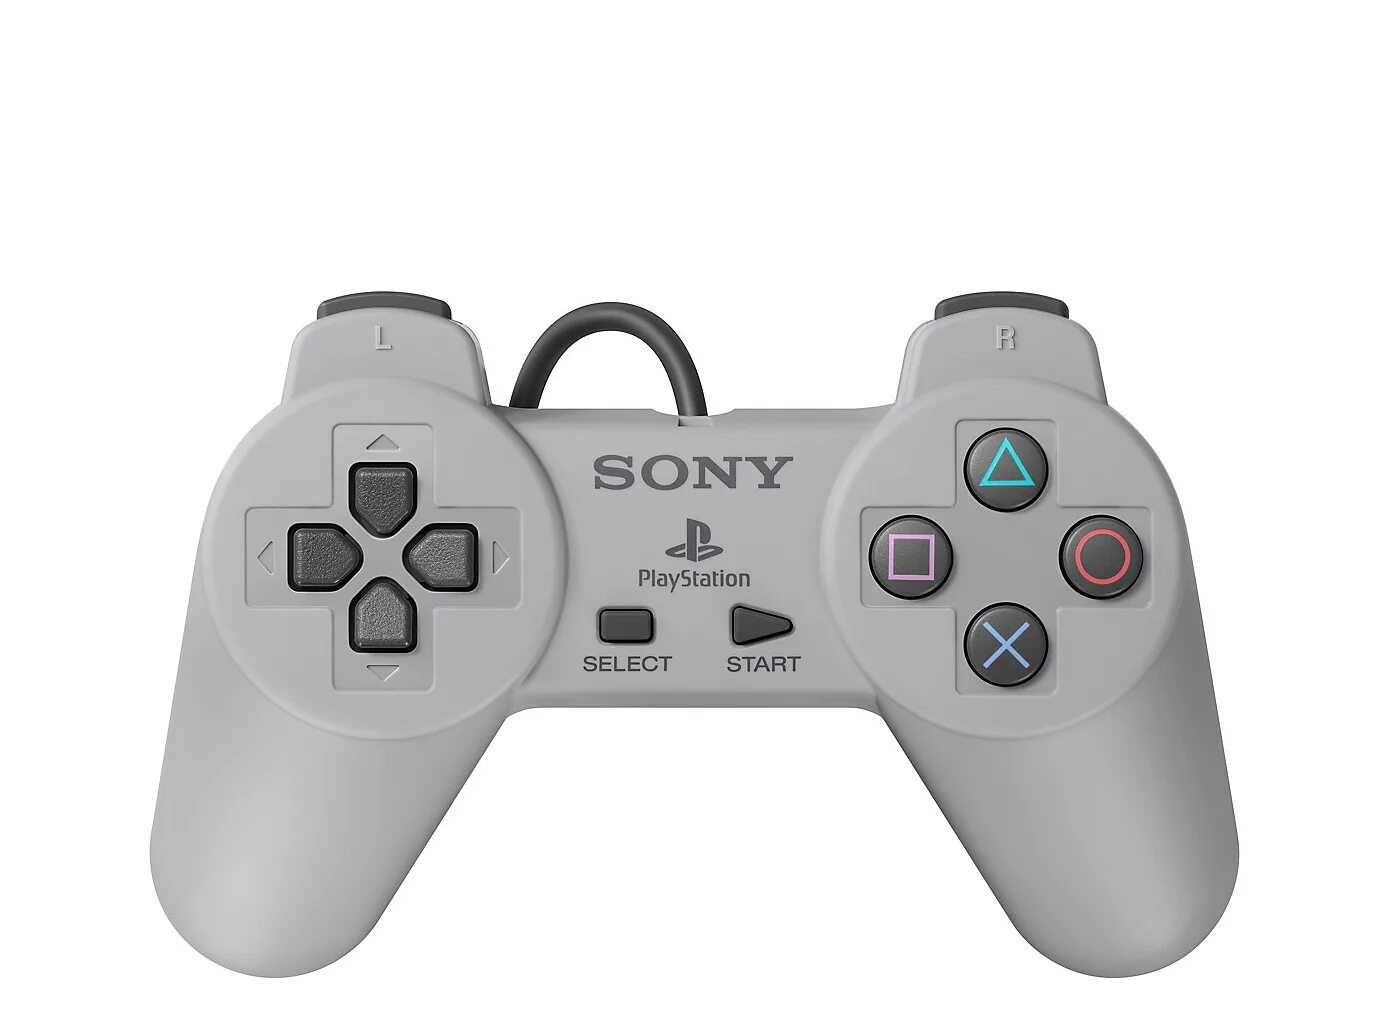 Пс 1а. Sony ps1 Classic. PLAYSTATION 1 Controller. Ps1 Classic Mini. Dualshock ps1.